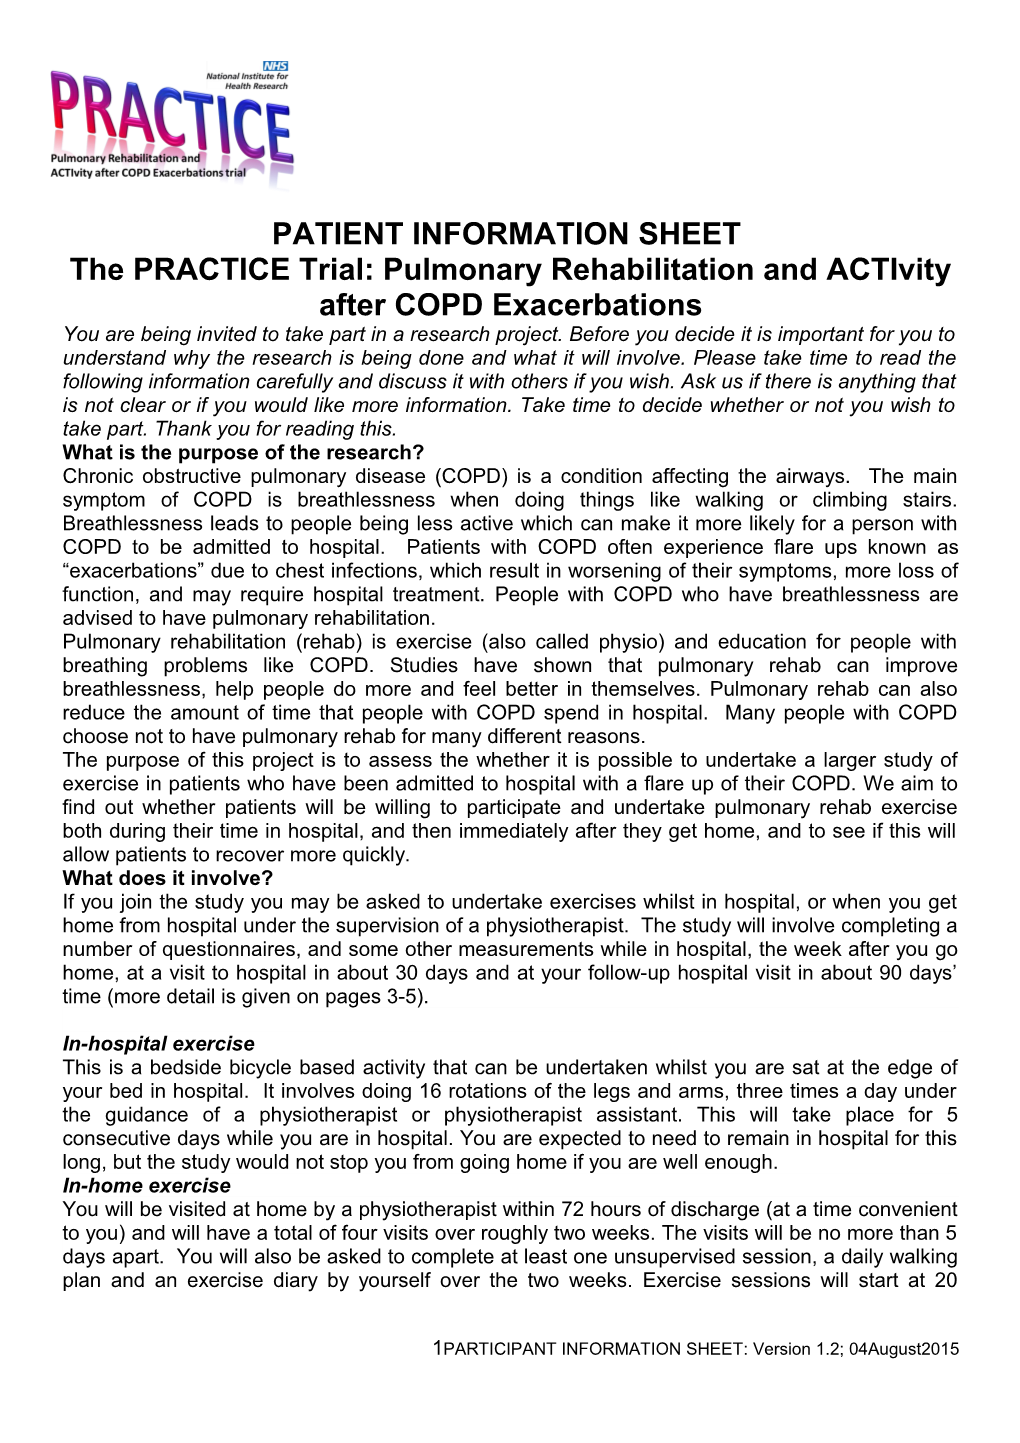 The PRACTICE Trial: Pulmonary Rehabilitation and Activityaftercopd Exacerbations